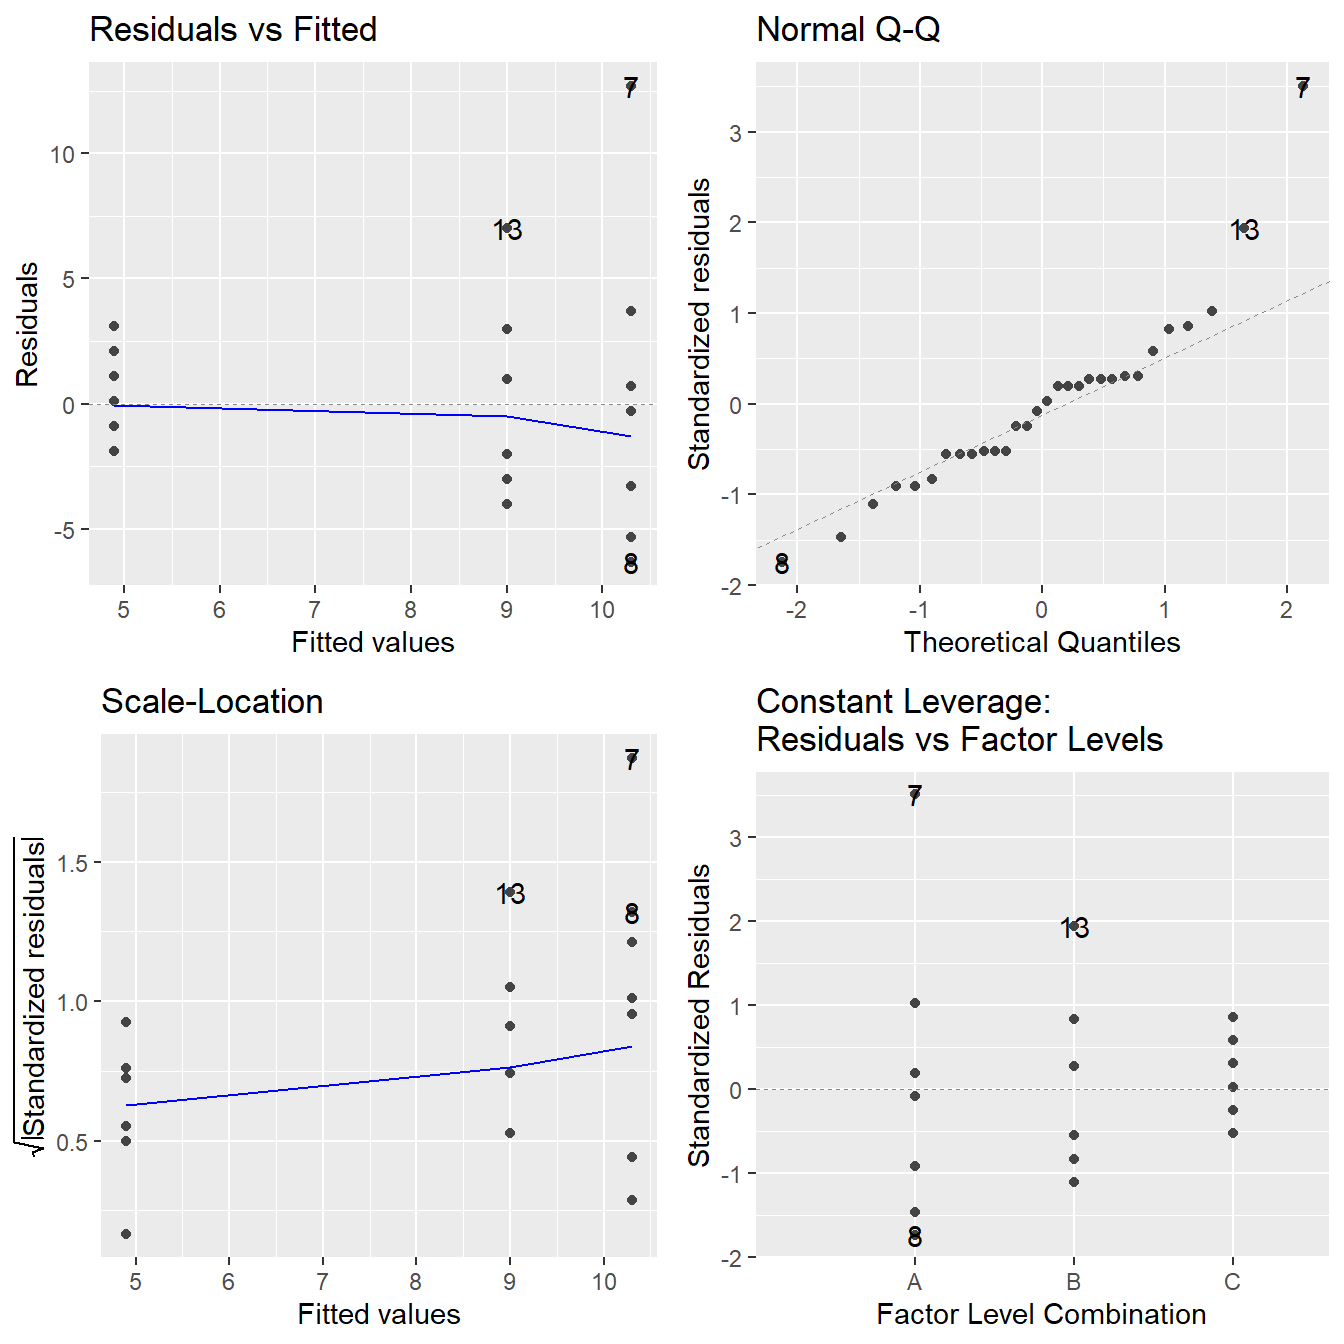 Residual plots for the One-Way ANOVA studying the effect of different drugs on immobilization times - Top-left a Residuals vs Fitted Plot; Top-right a Normal Q-Q plot of the residuals; Bottom-left the Scale-Location plot; and Bottom-right a Residuals vs Leverage plot.